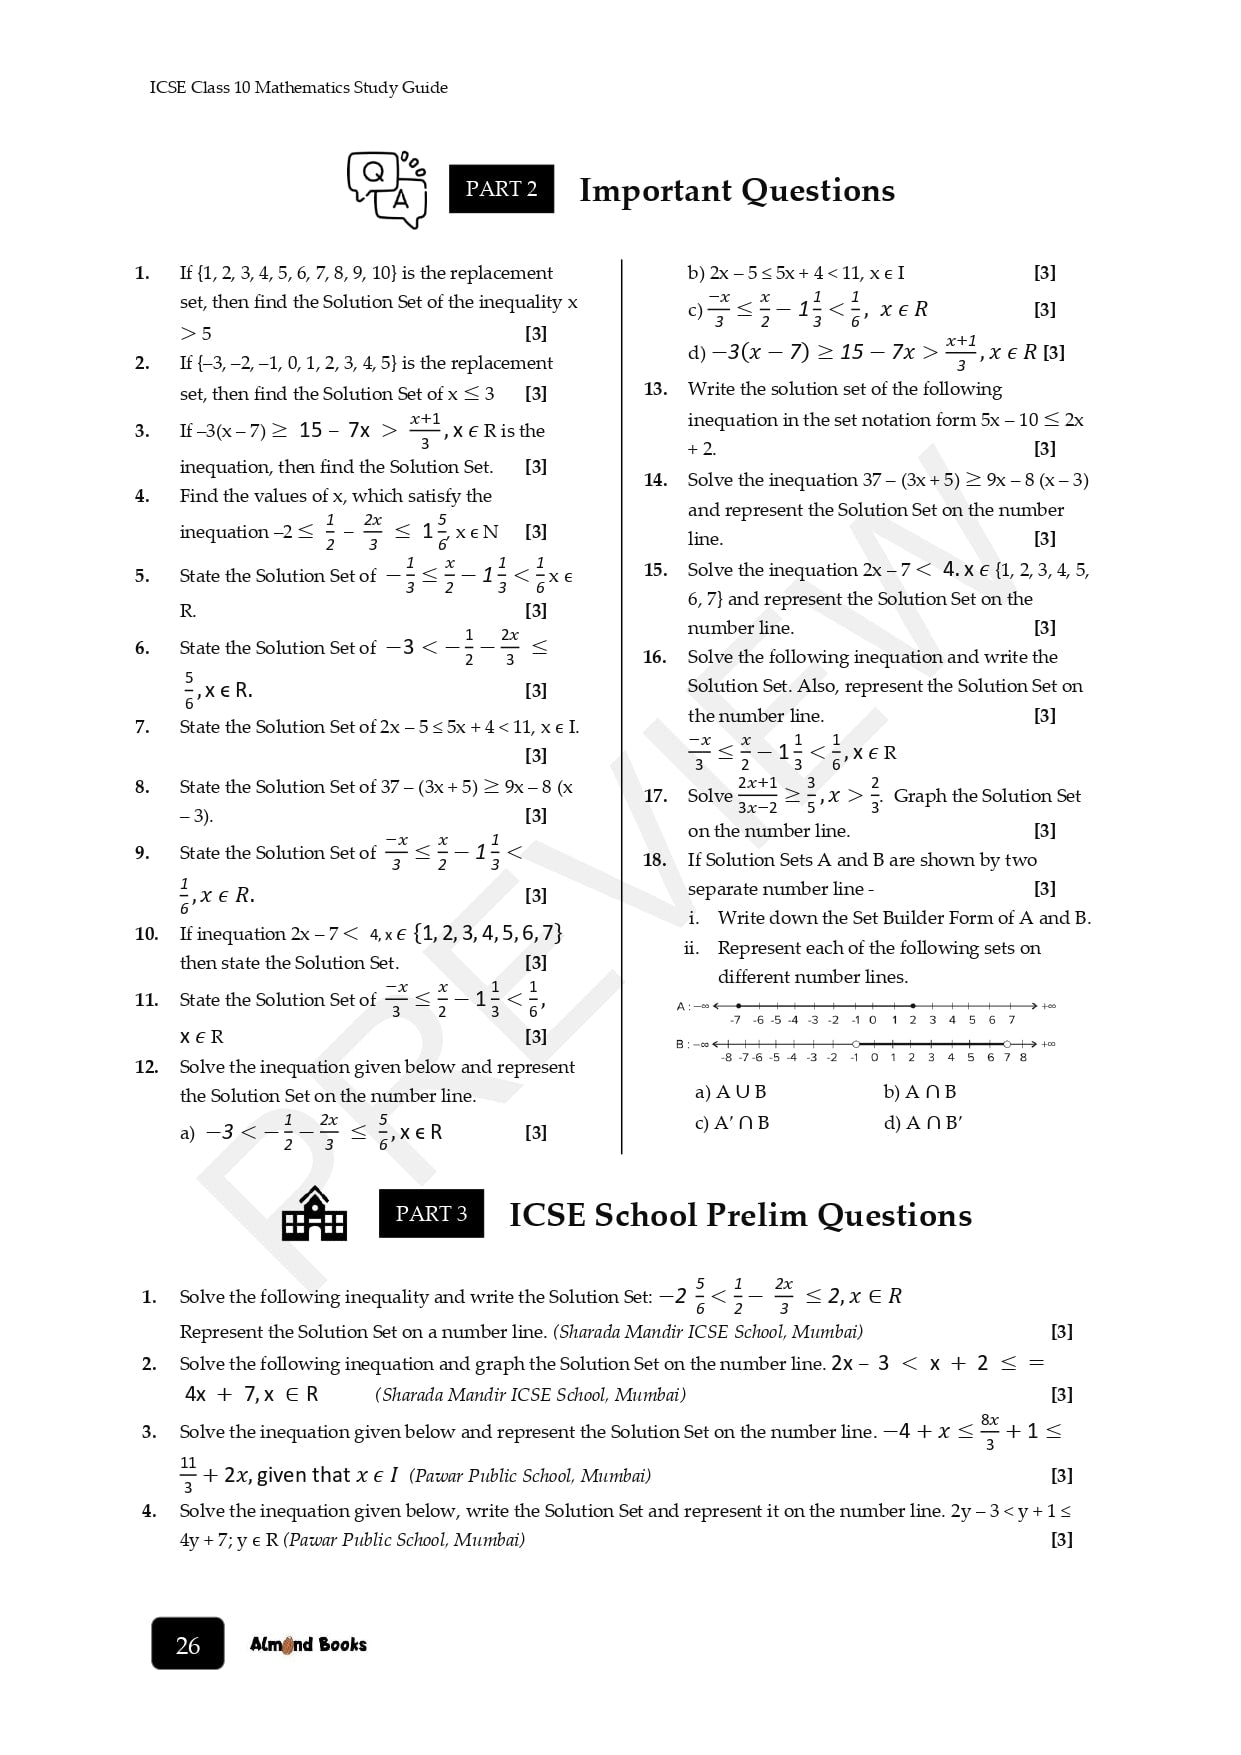 Best ICSE Maths Guide for Board Exams